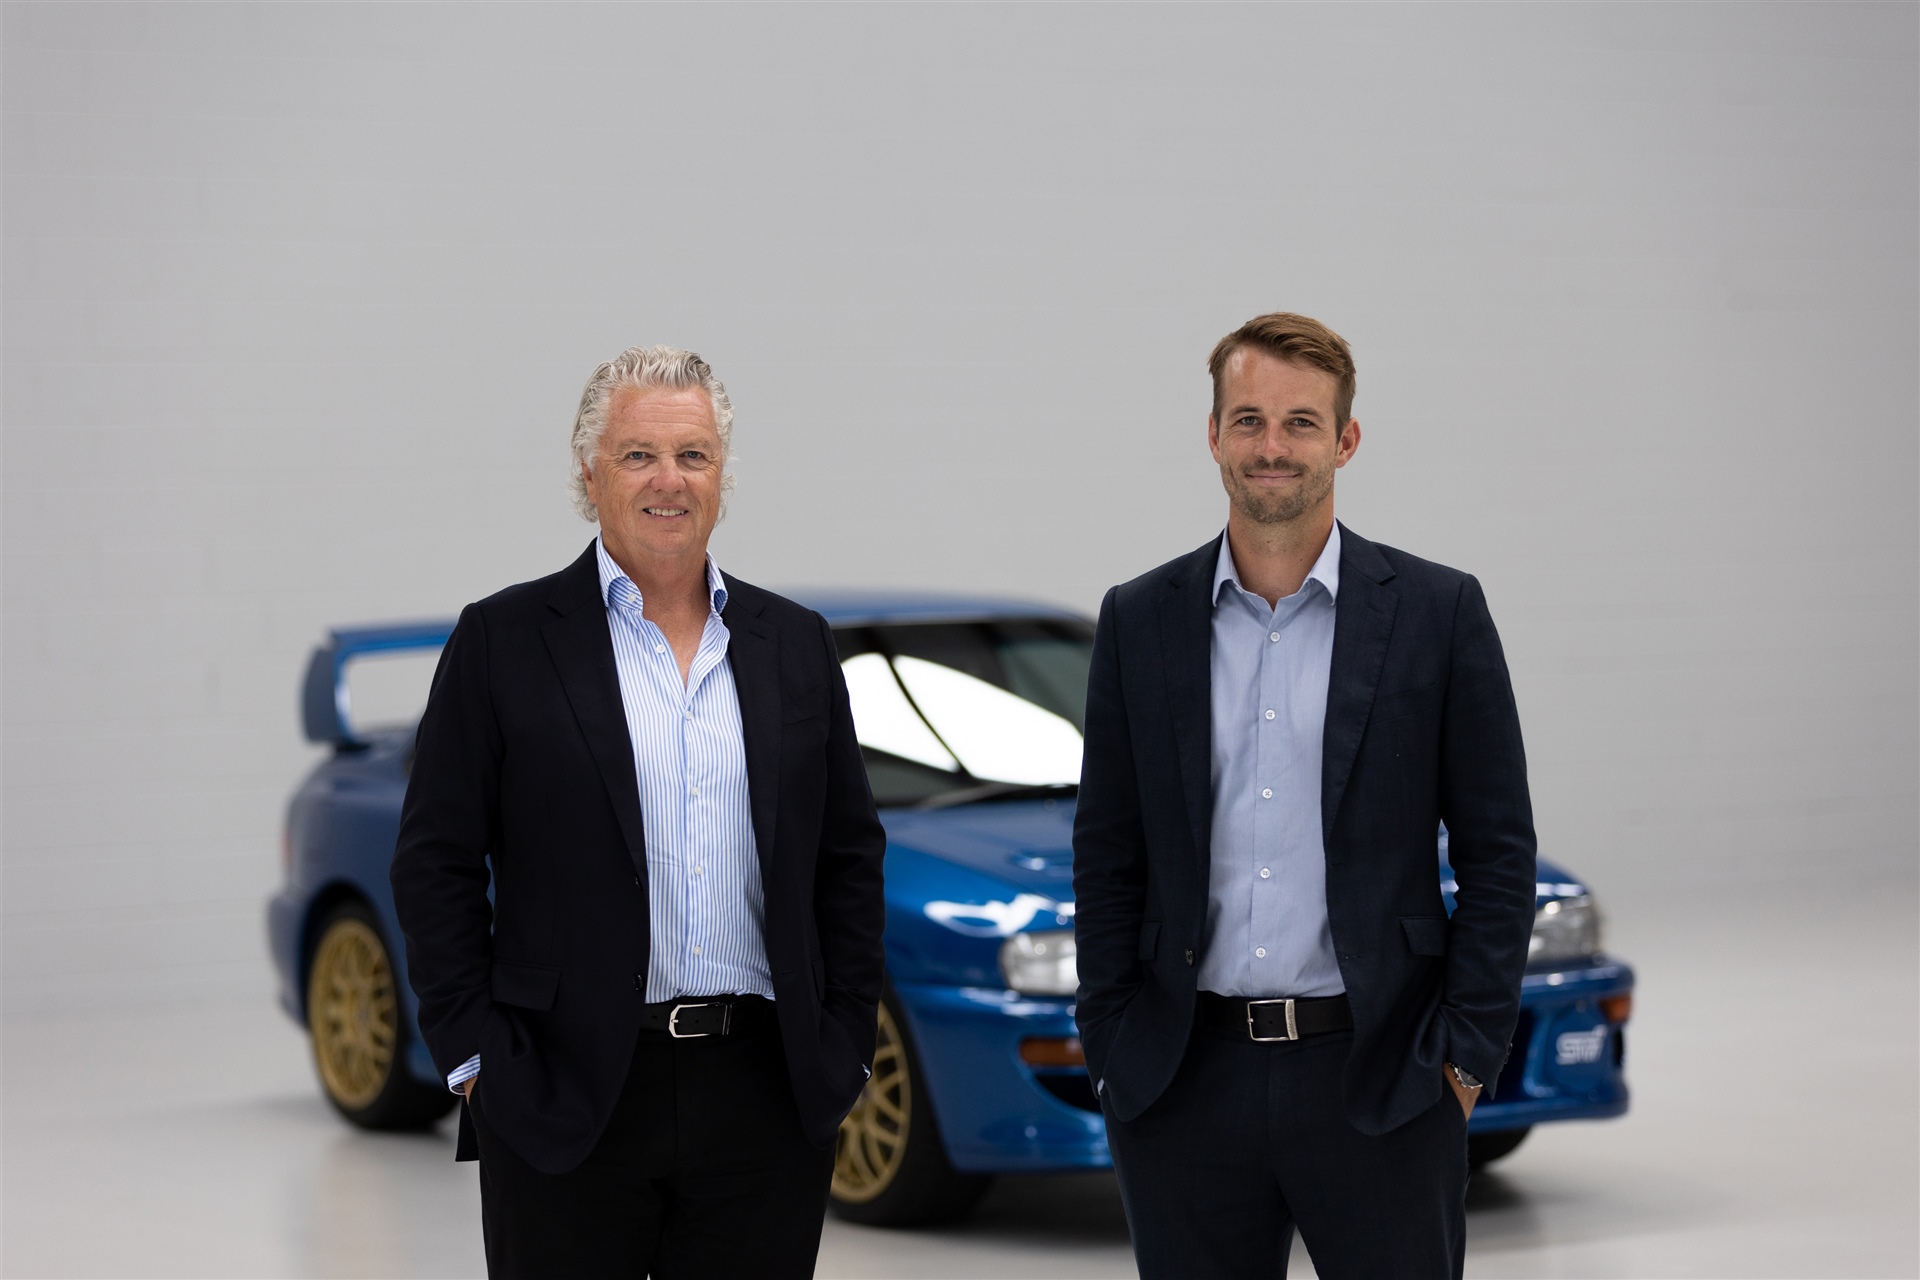 Lucas Martin at helm of new dealership